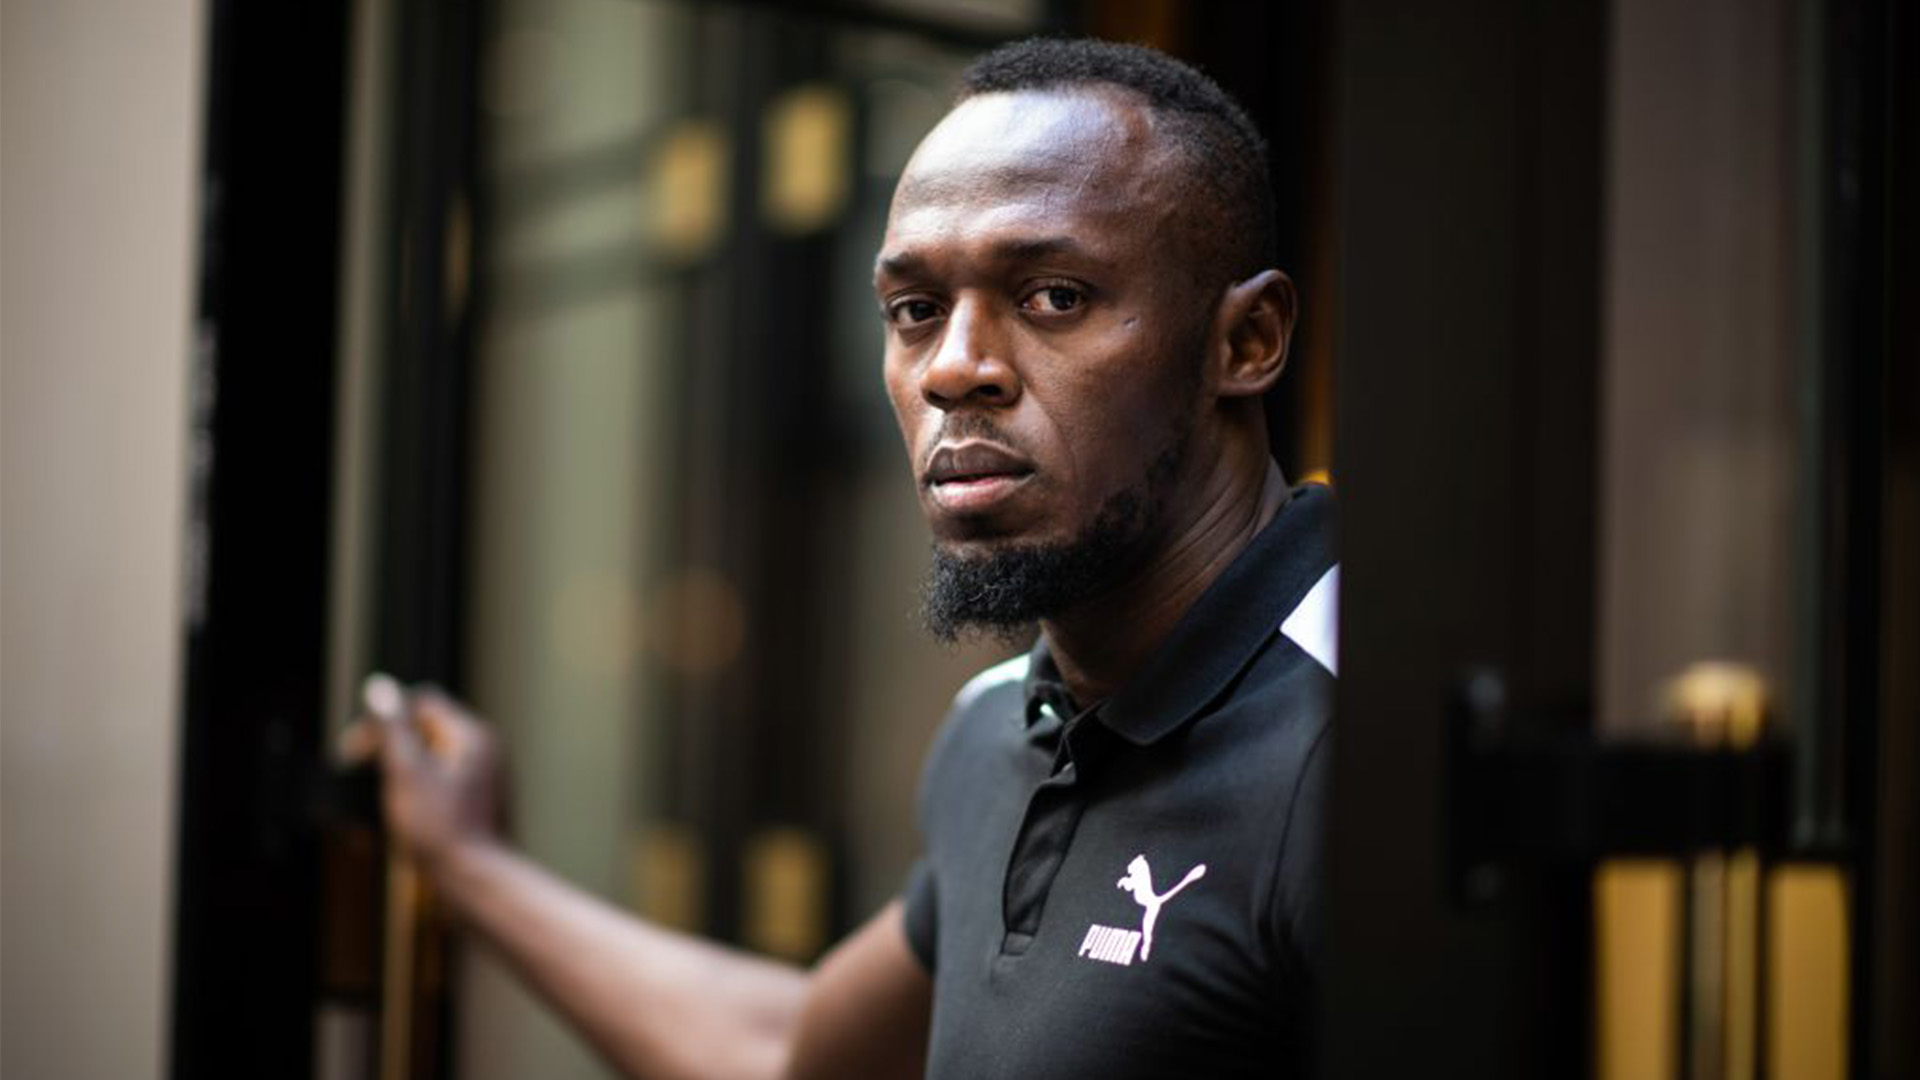 Employee At Investment Firm Allegedly Involved In Usain Bolt's Missing $12.7M